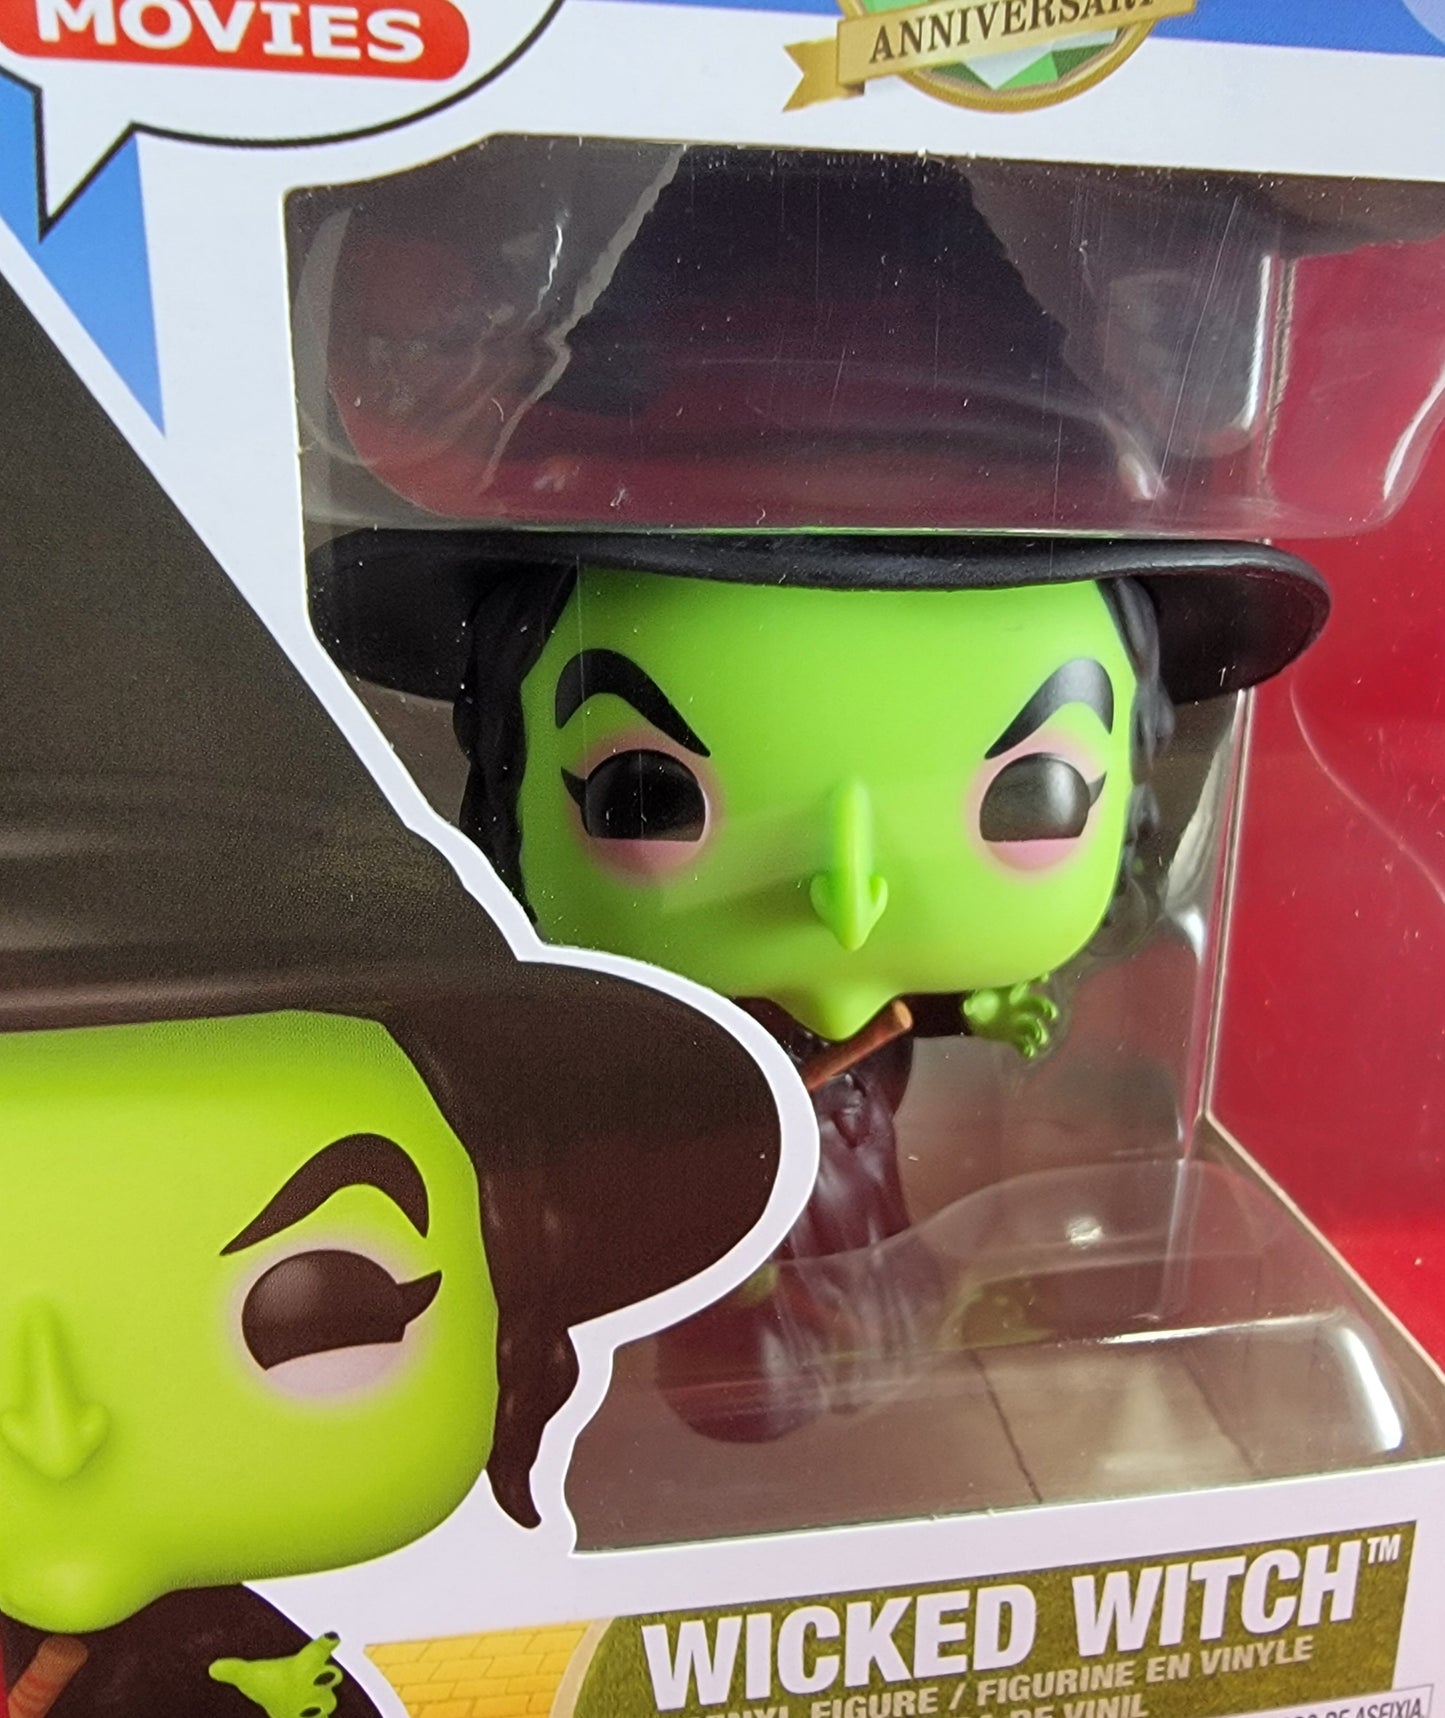 Wicked witch funko # 1519 (nib) with pop protector